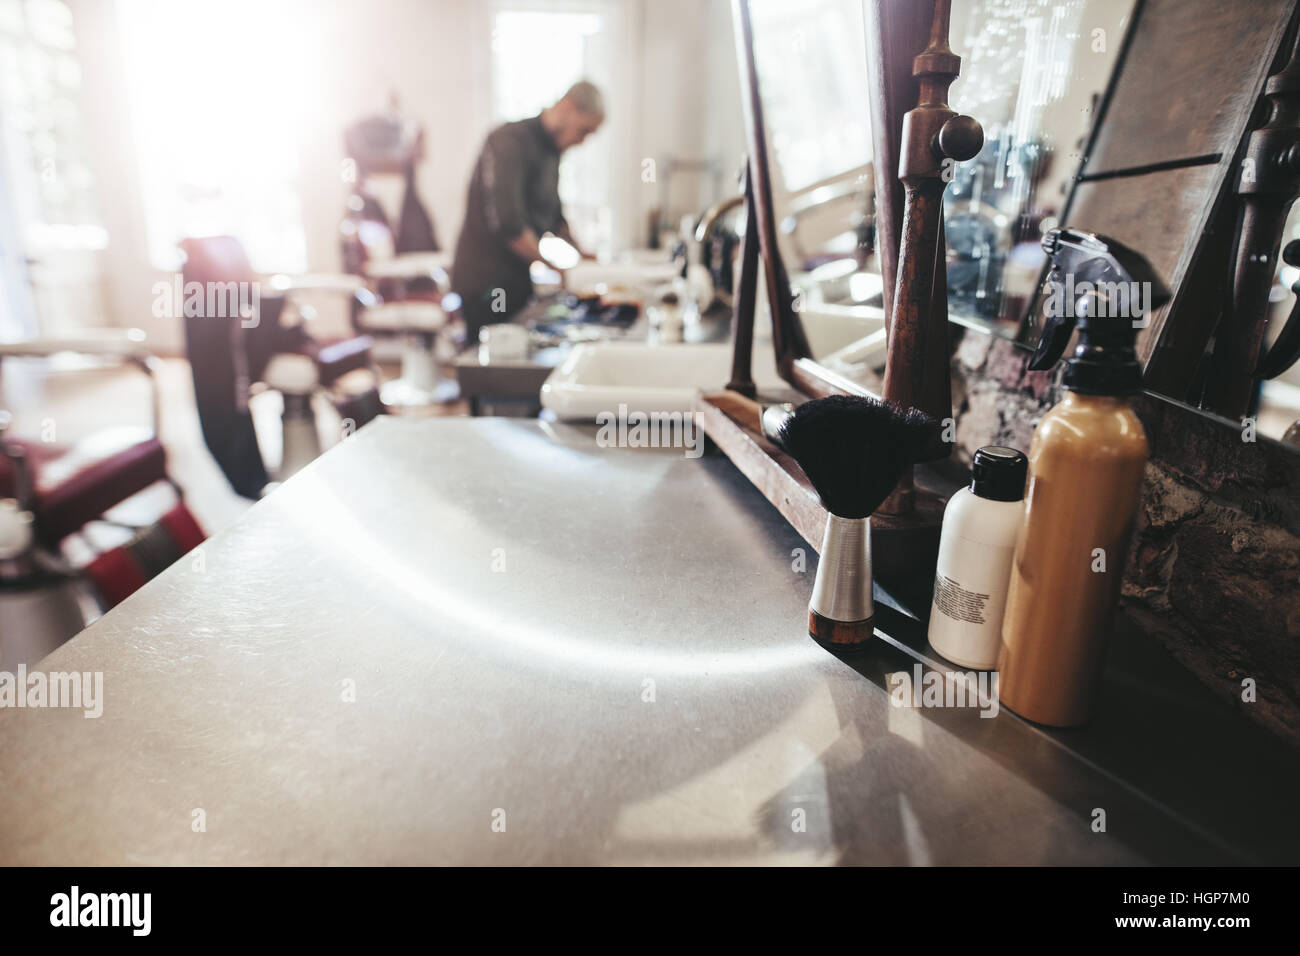 Hairdresser tools on counter with barber in background. Barber shop with hairstyling equipments, Stock Photo